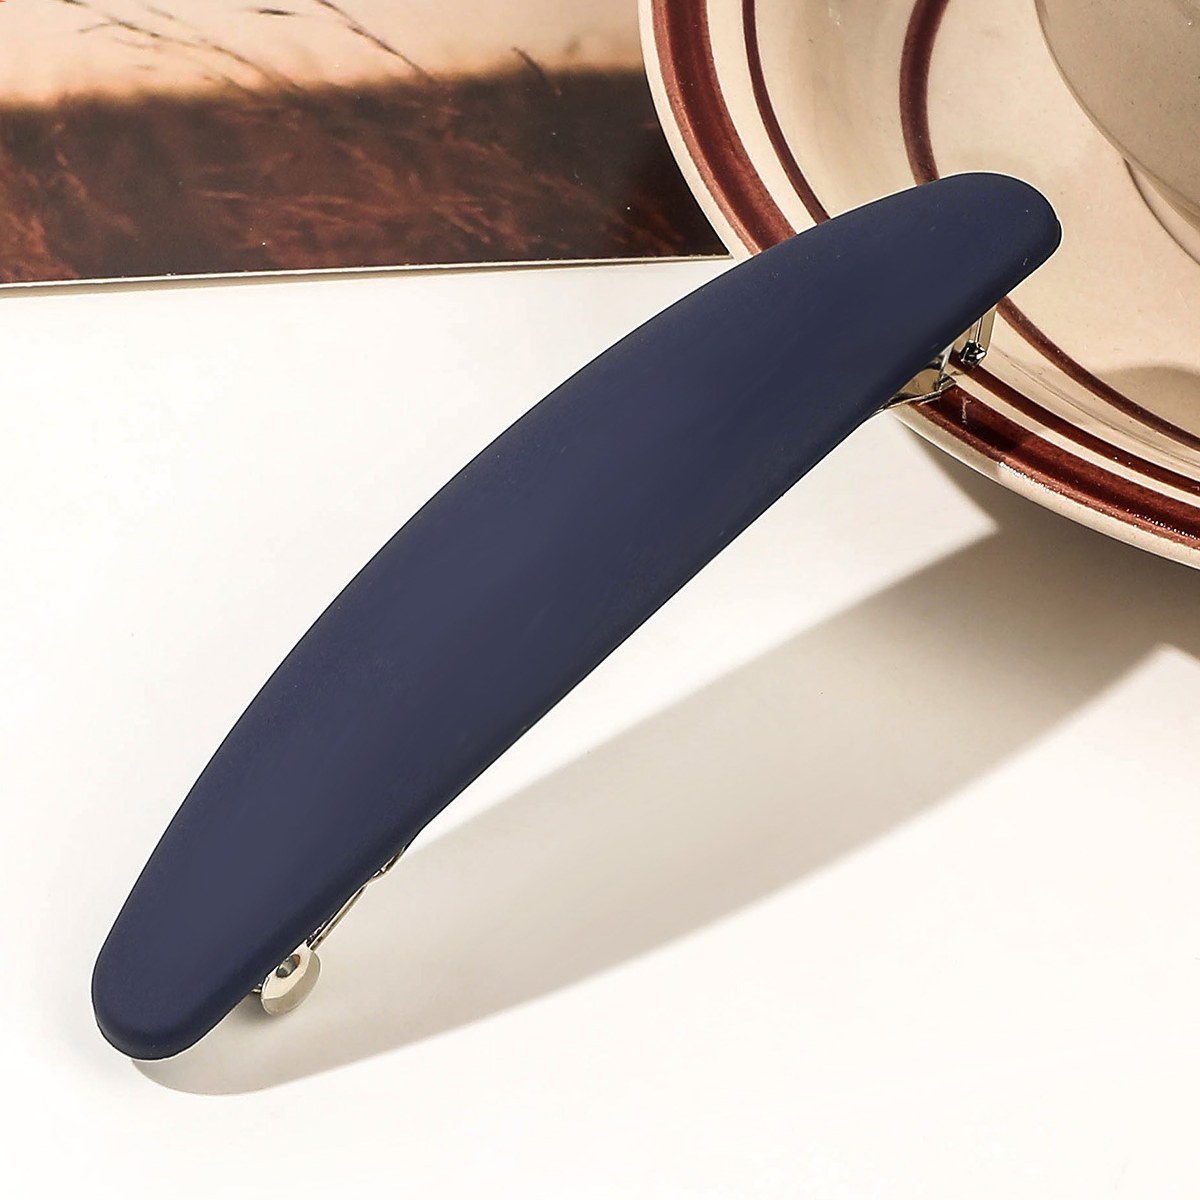 10.5cm oval spring clamp - Navy blue